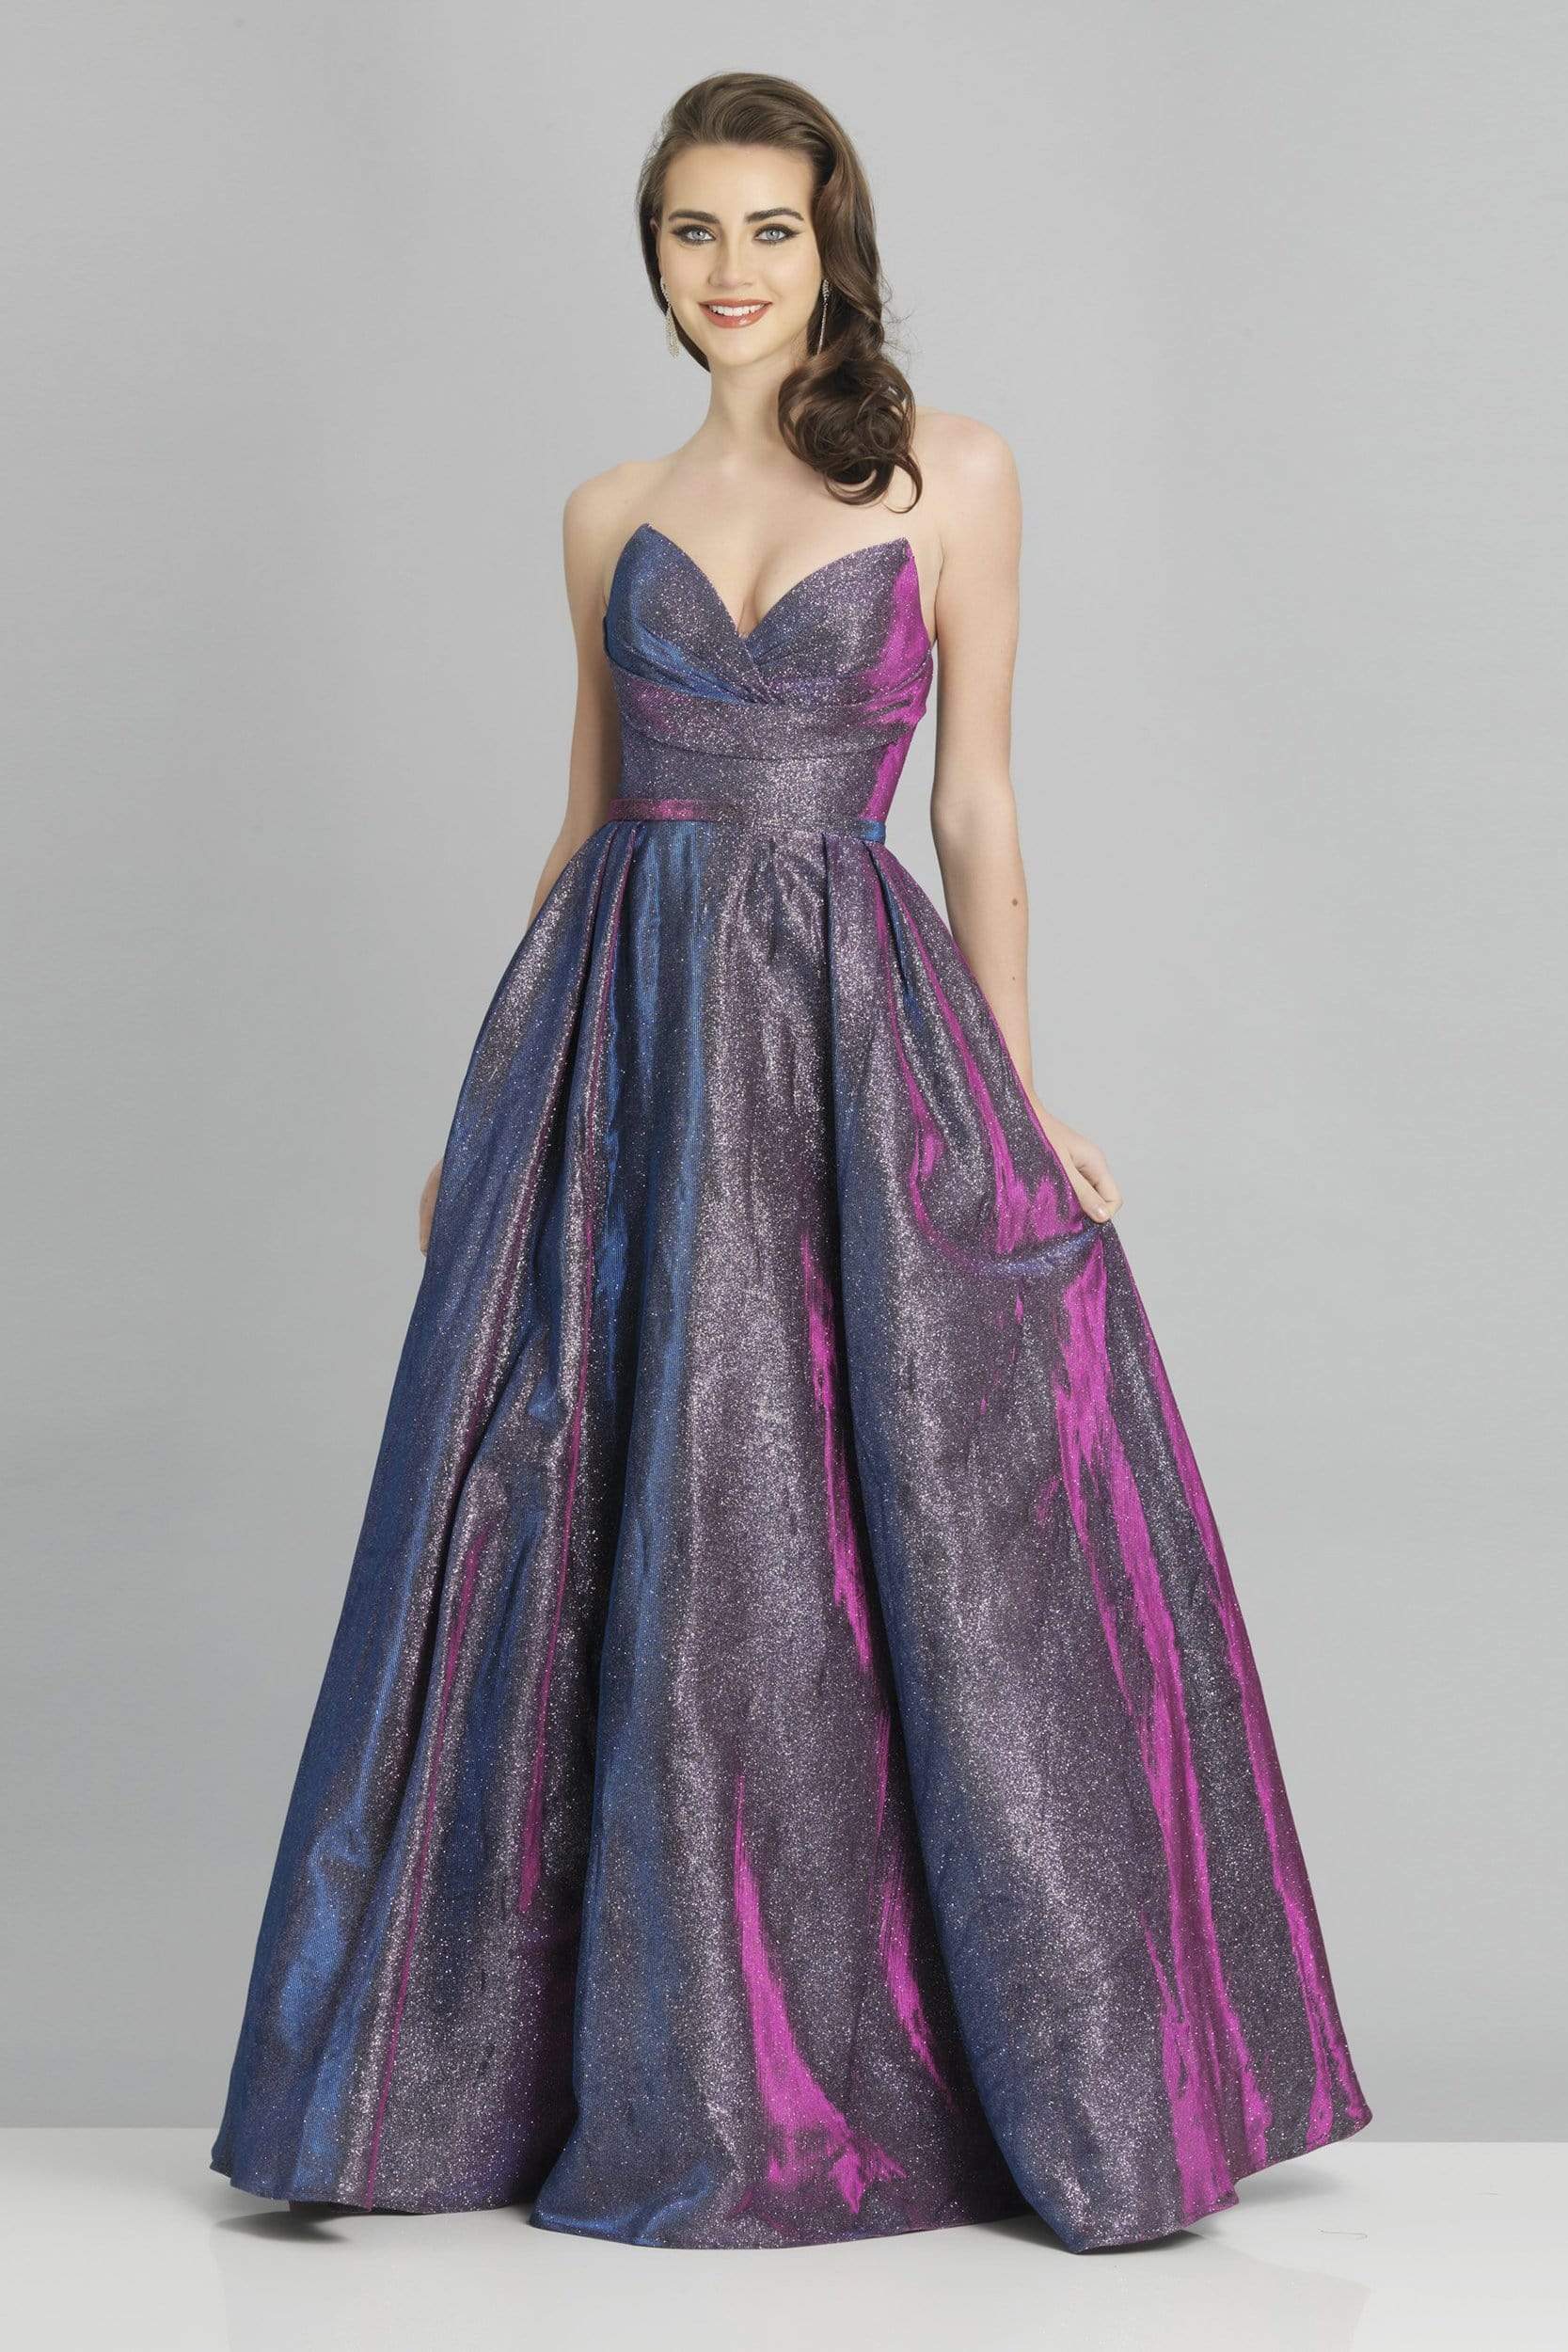 Dave & Johnny - A8357 Strapless V-Neck Pleated Ballgown
